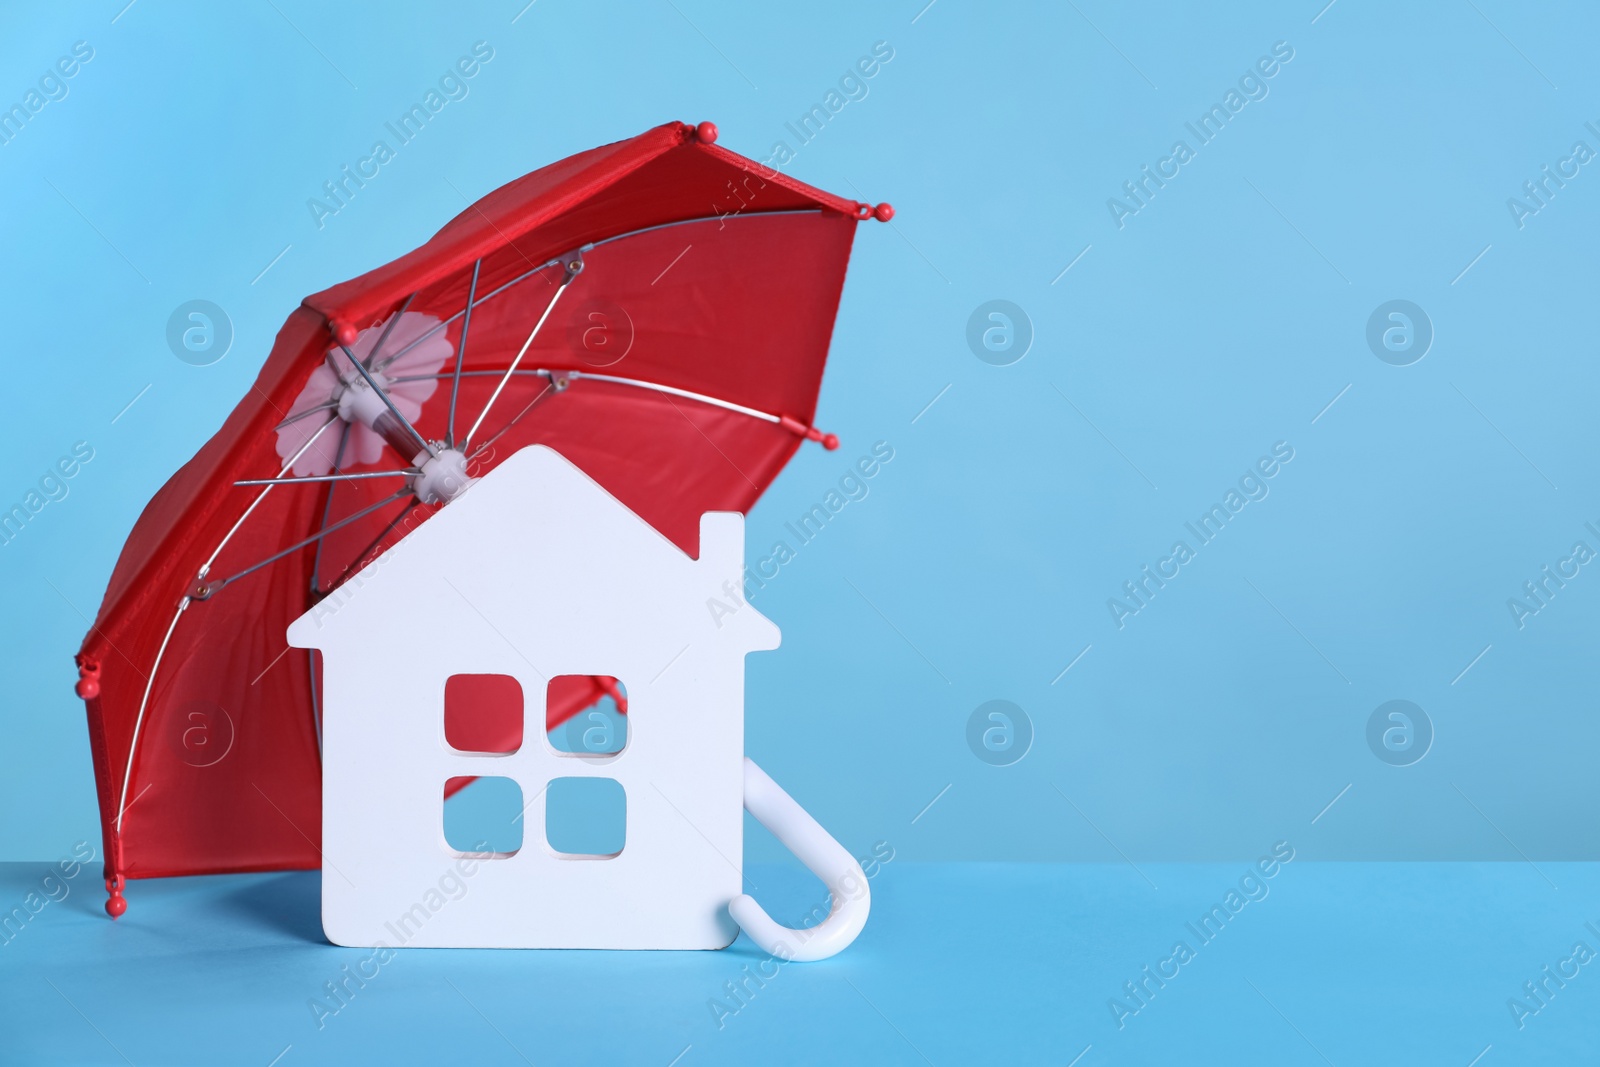 Photo of Small umbrella and house figure on light blue background. Space for text